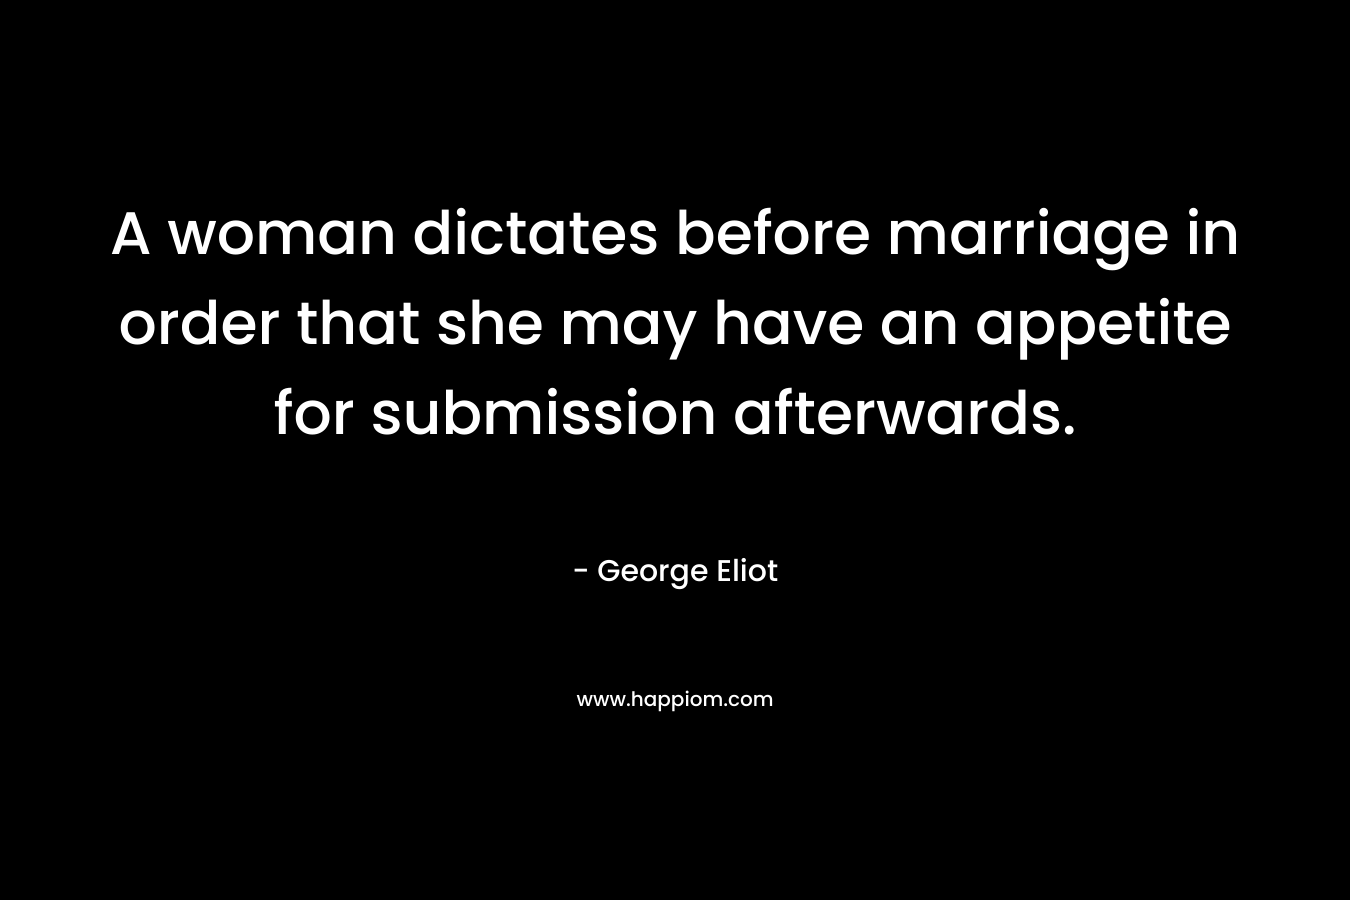 A woman dictates before marriage in order that she may have an appetite for submission afterwards. – George Eliot